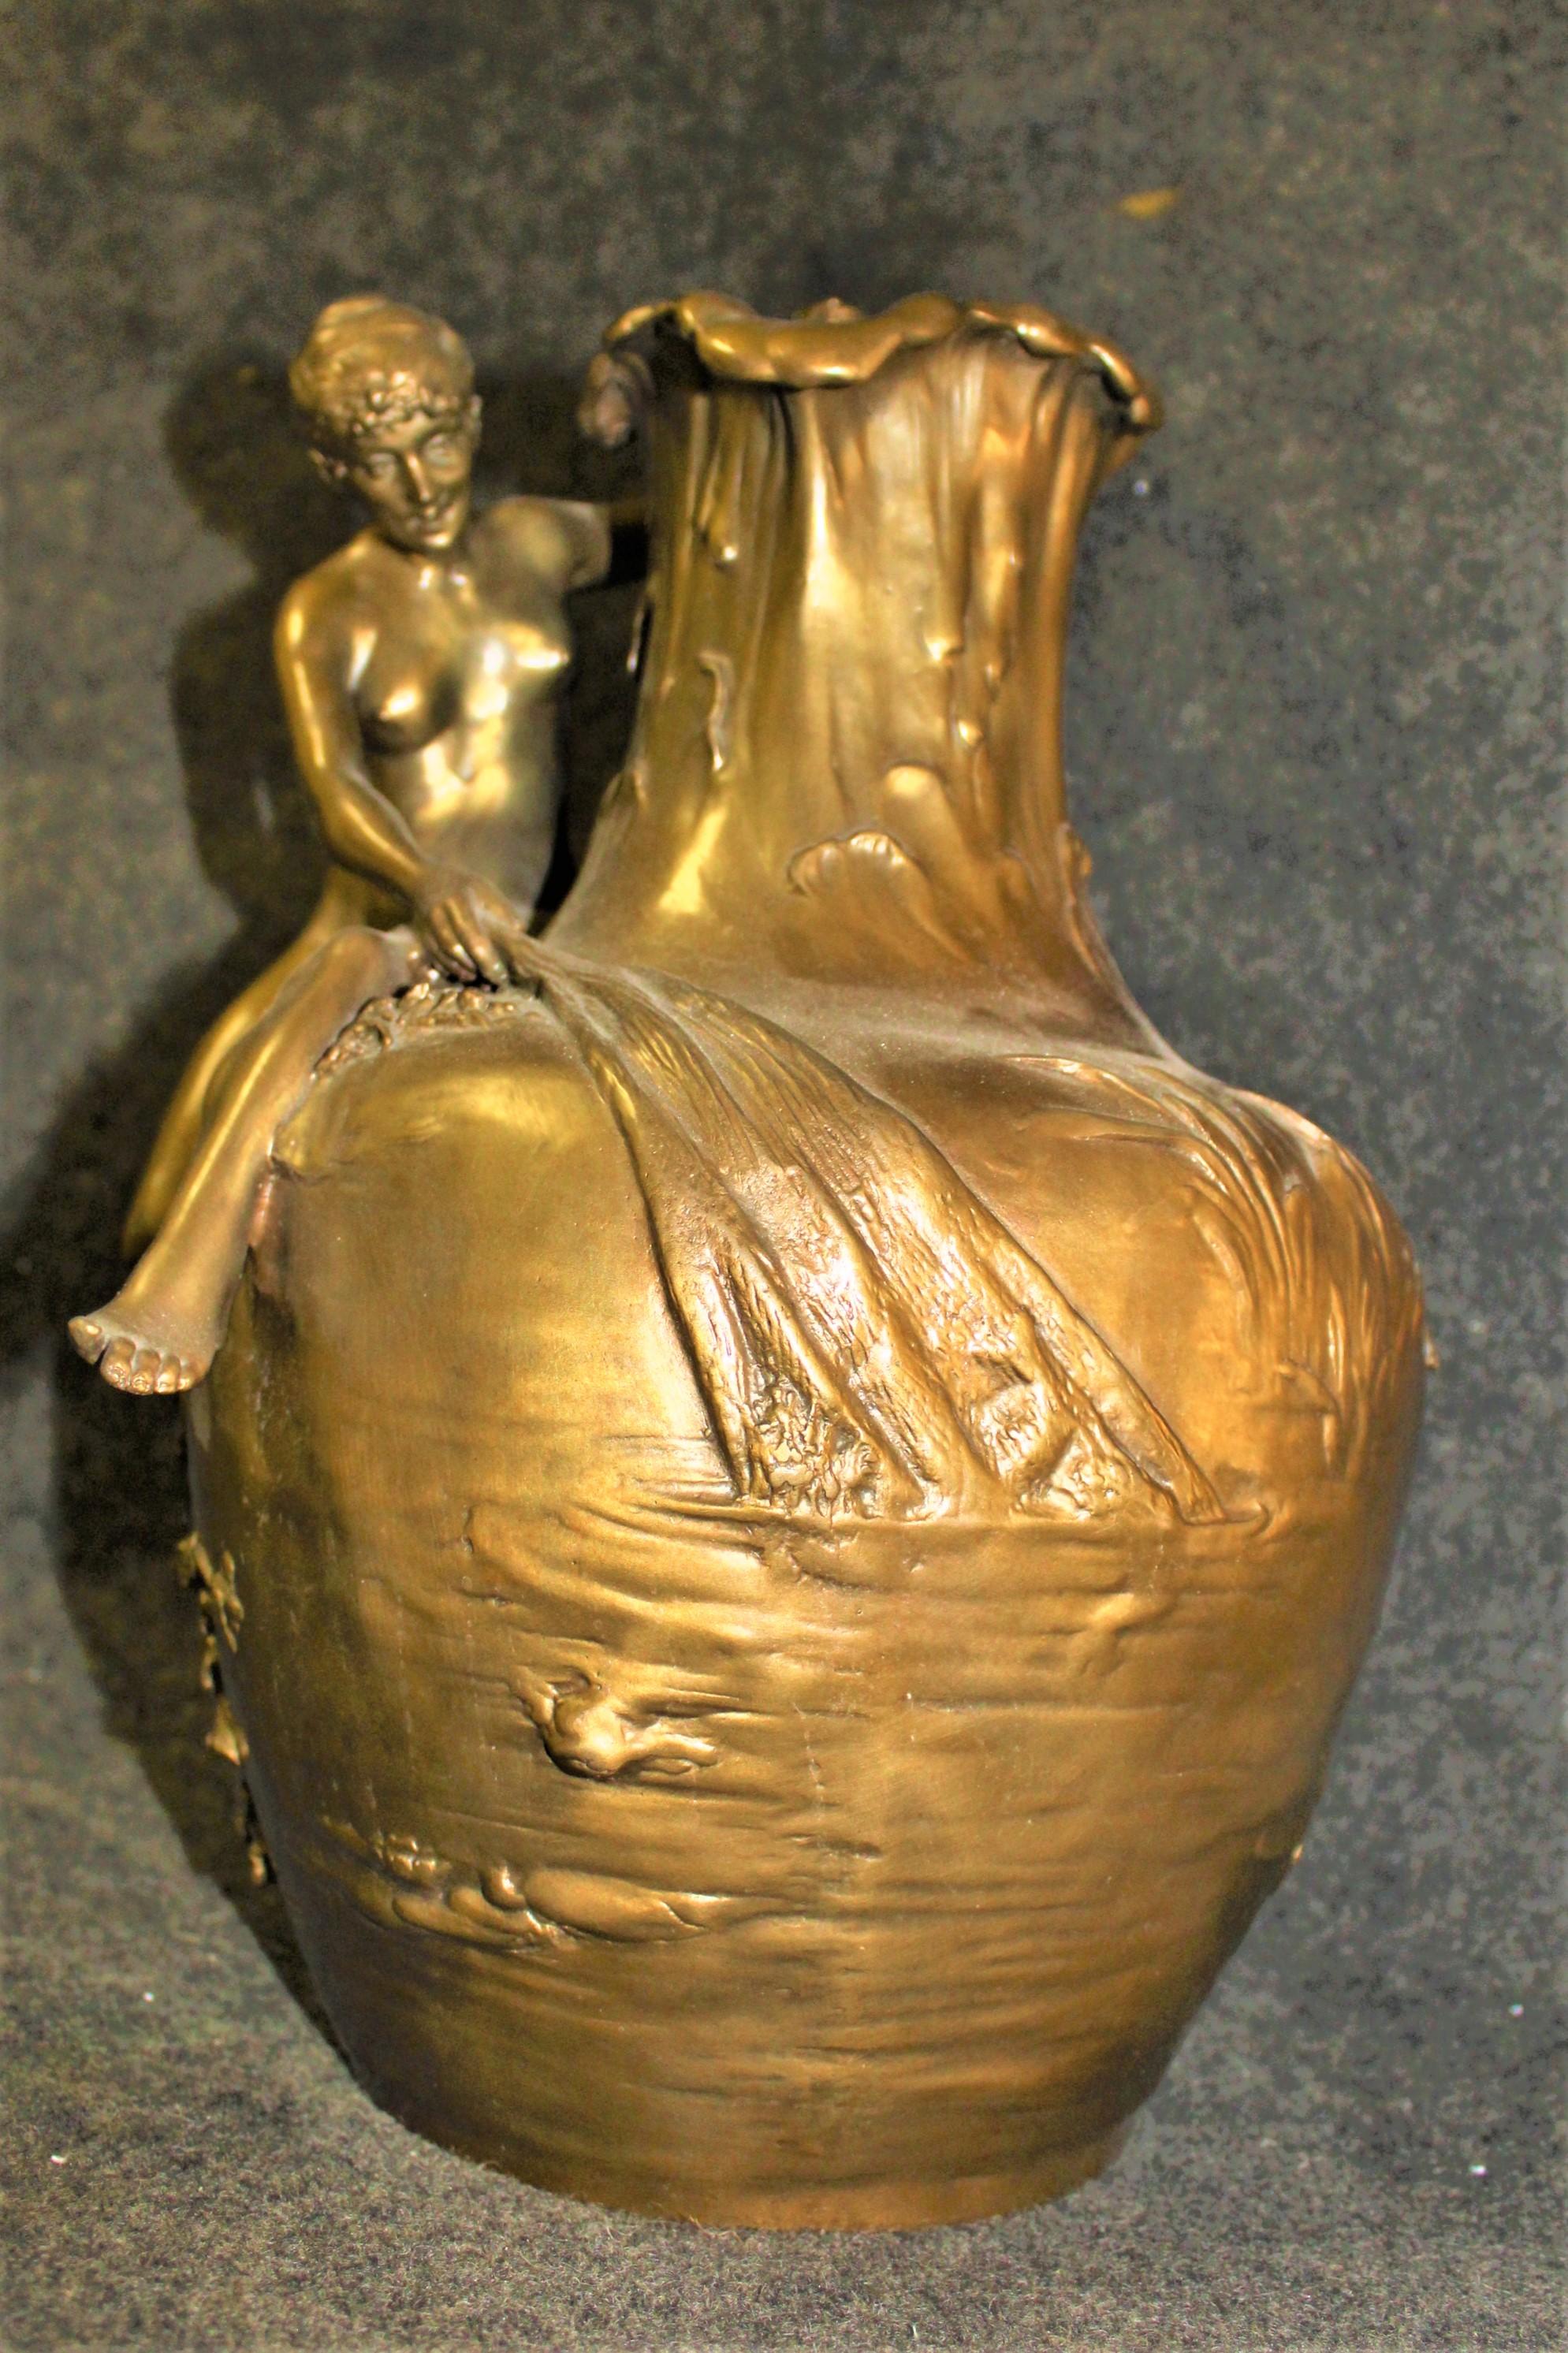 A great looking nude lady hanging on the side of a vase pulling in a fishing net. Good size at 16